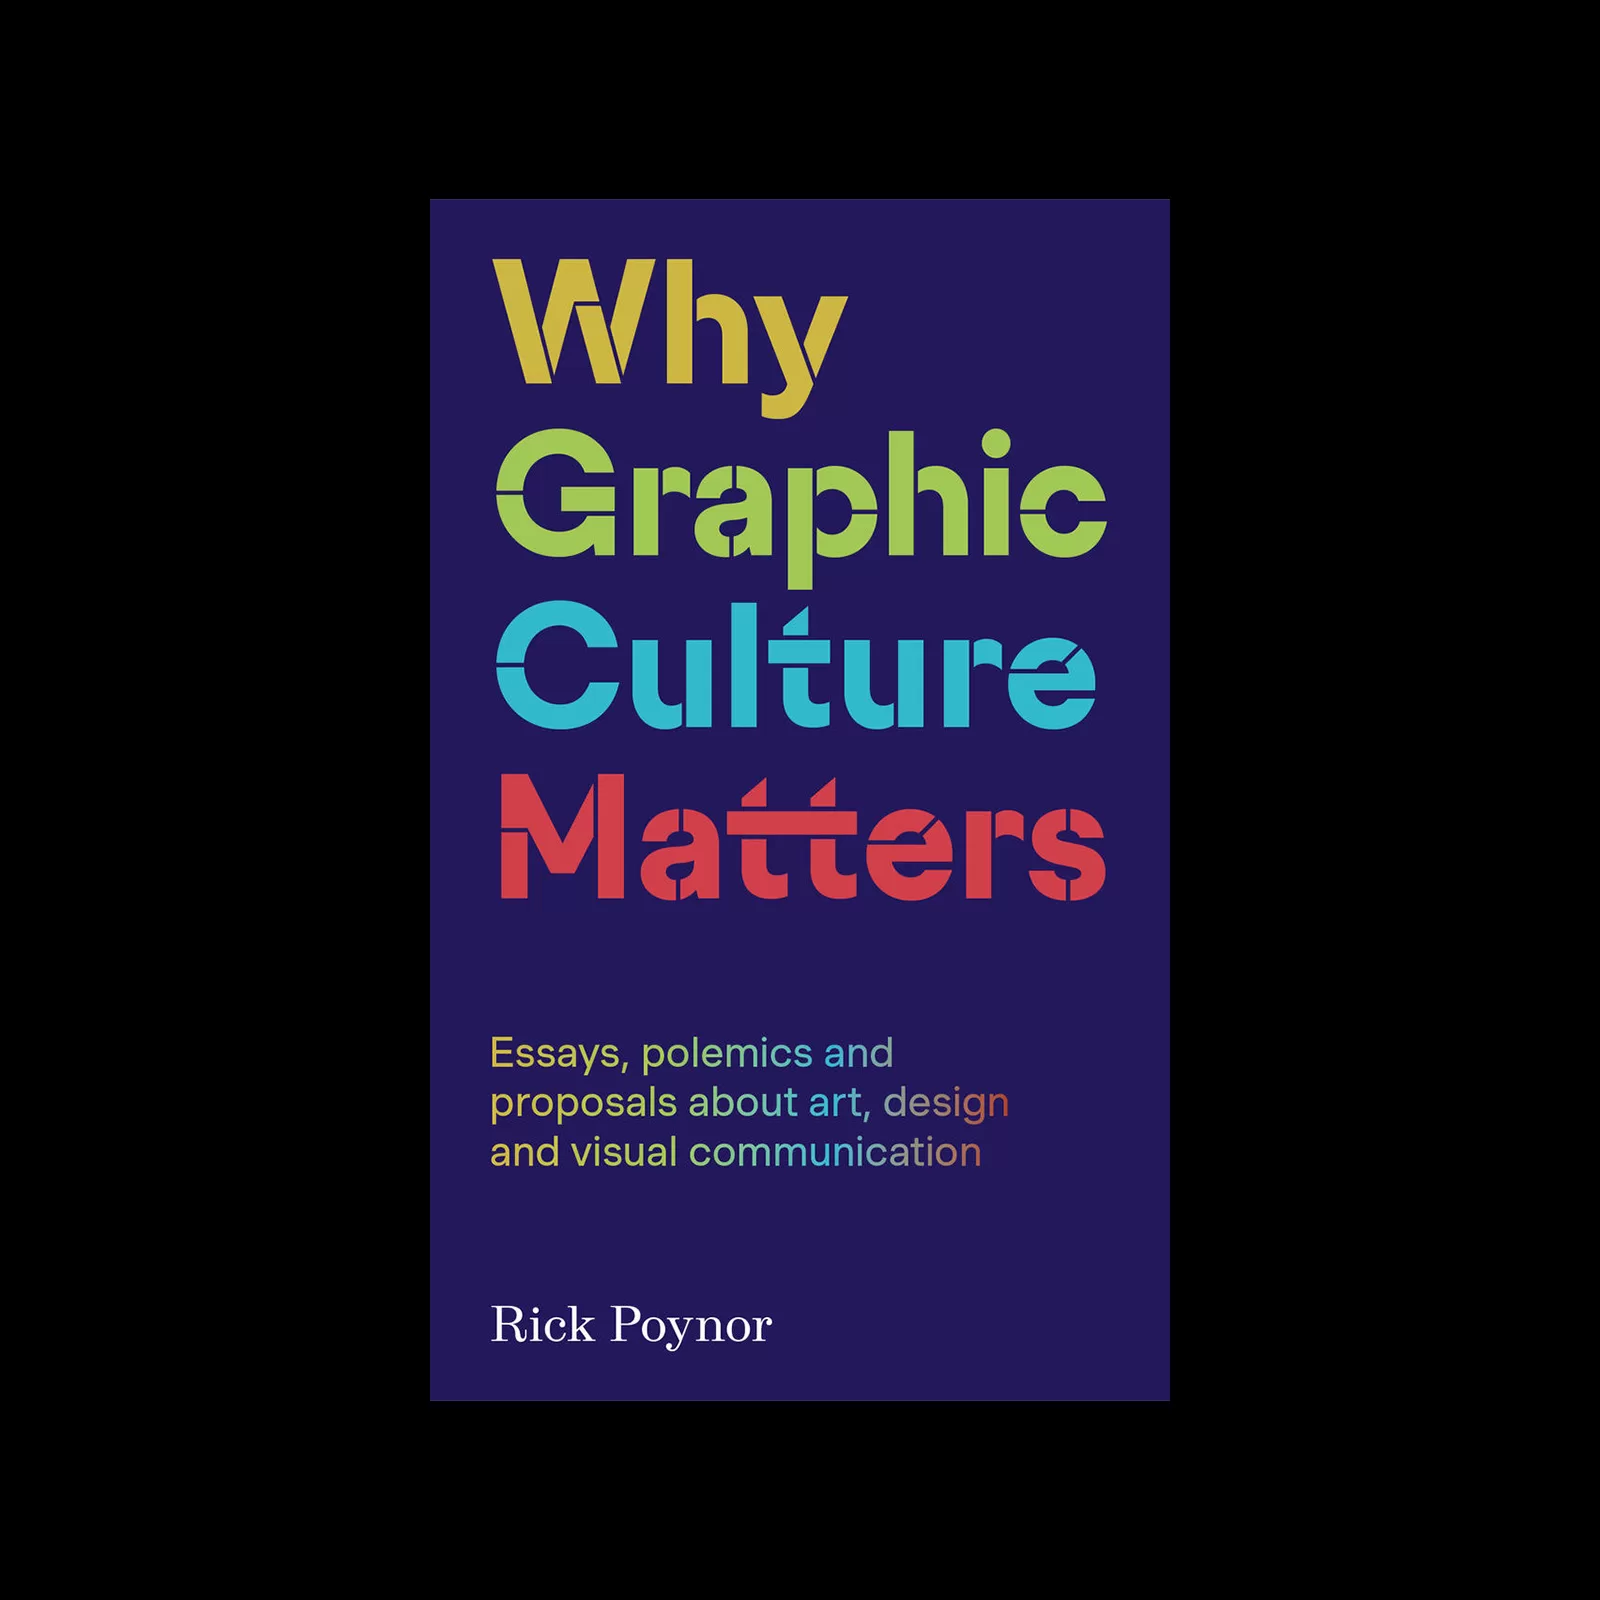 Why Graphic Culture Matters by Rick Poynor. Published by Occasional Papers